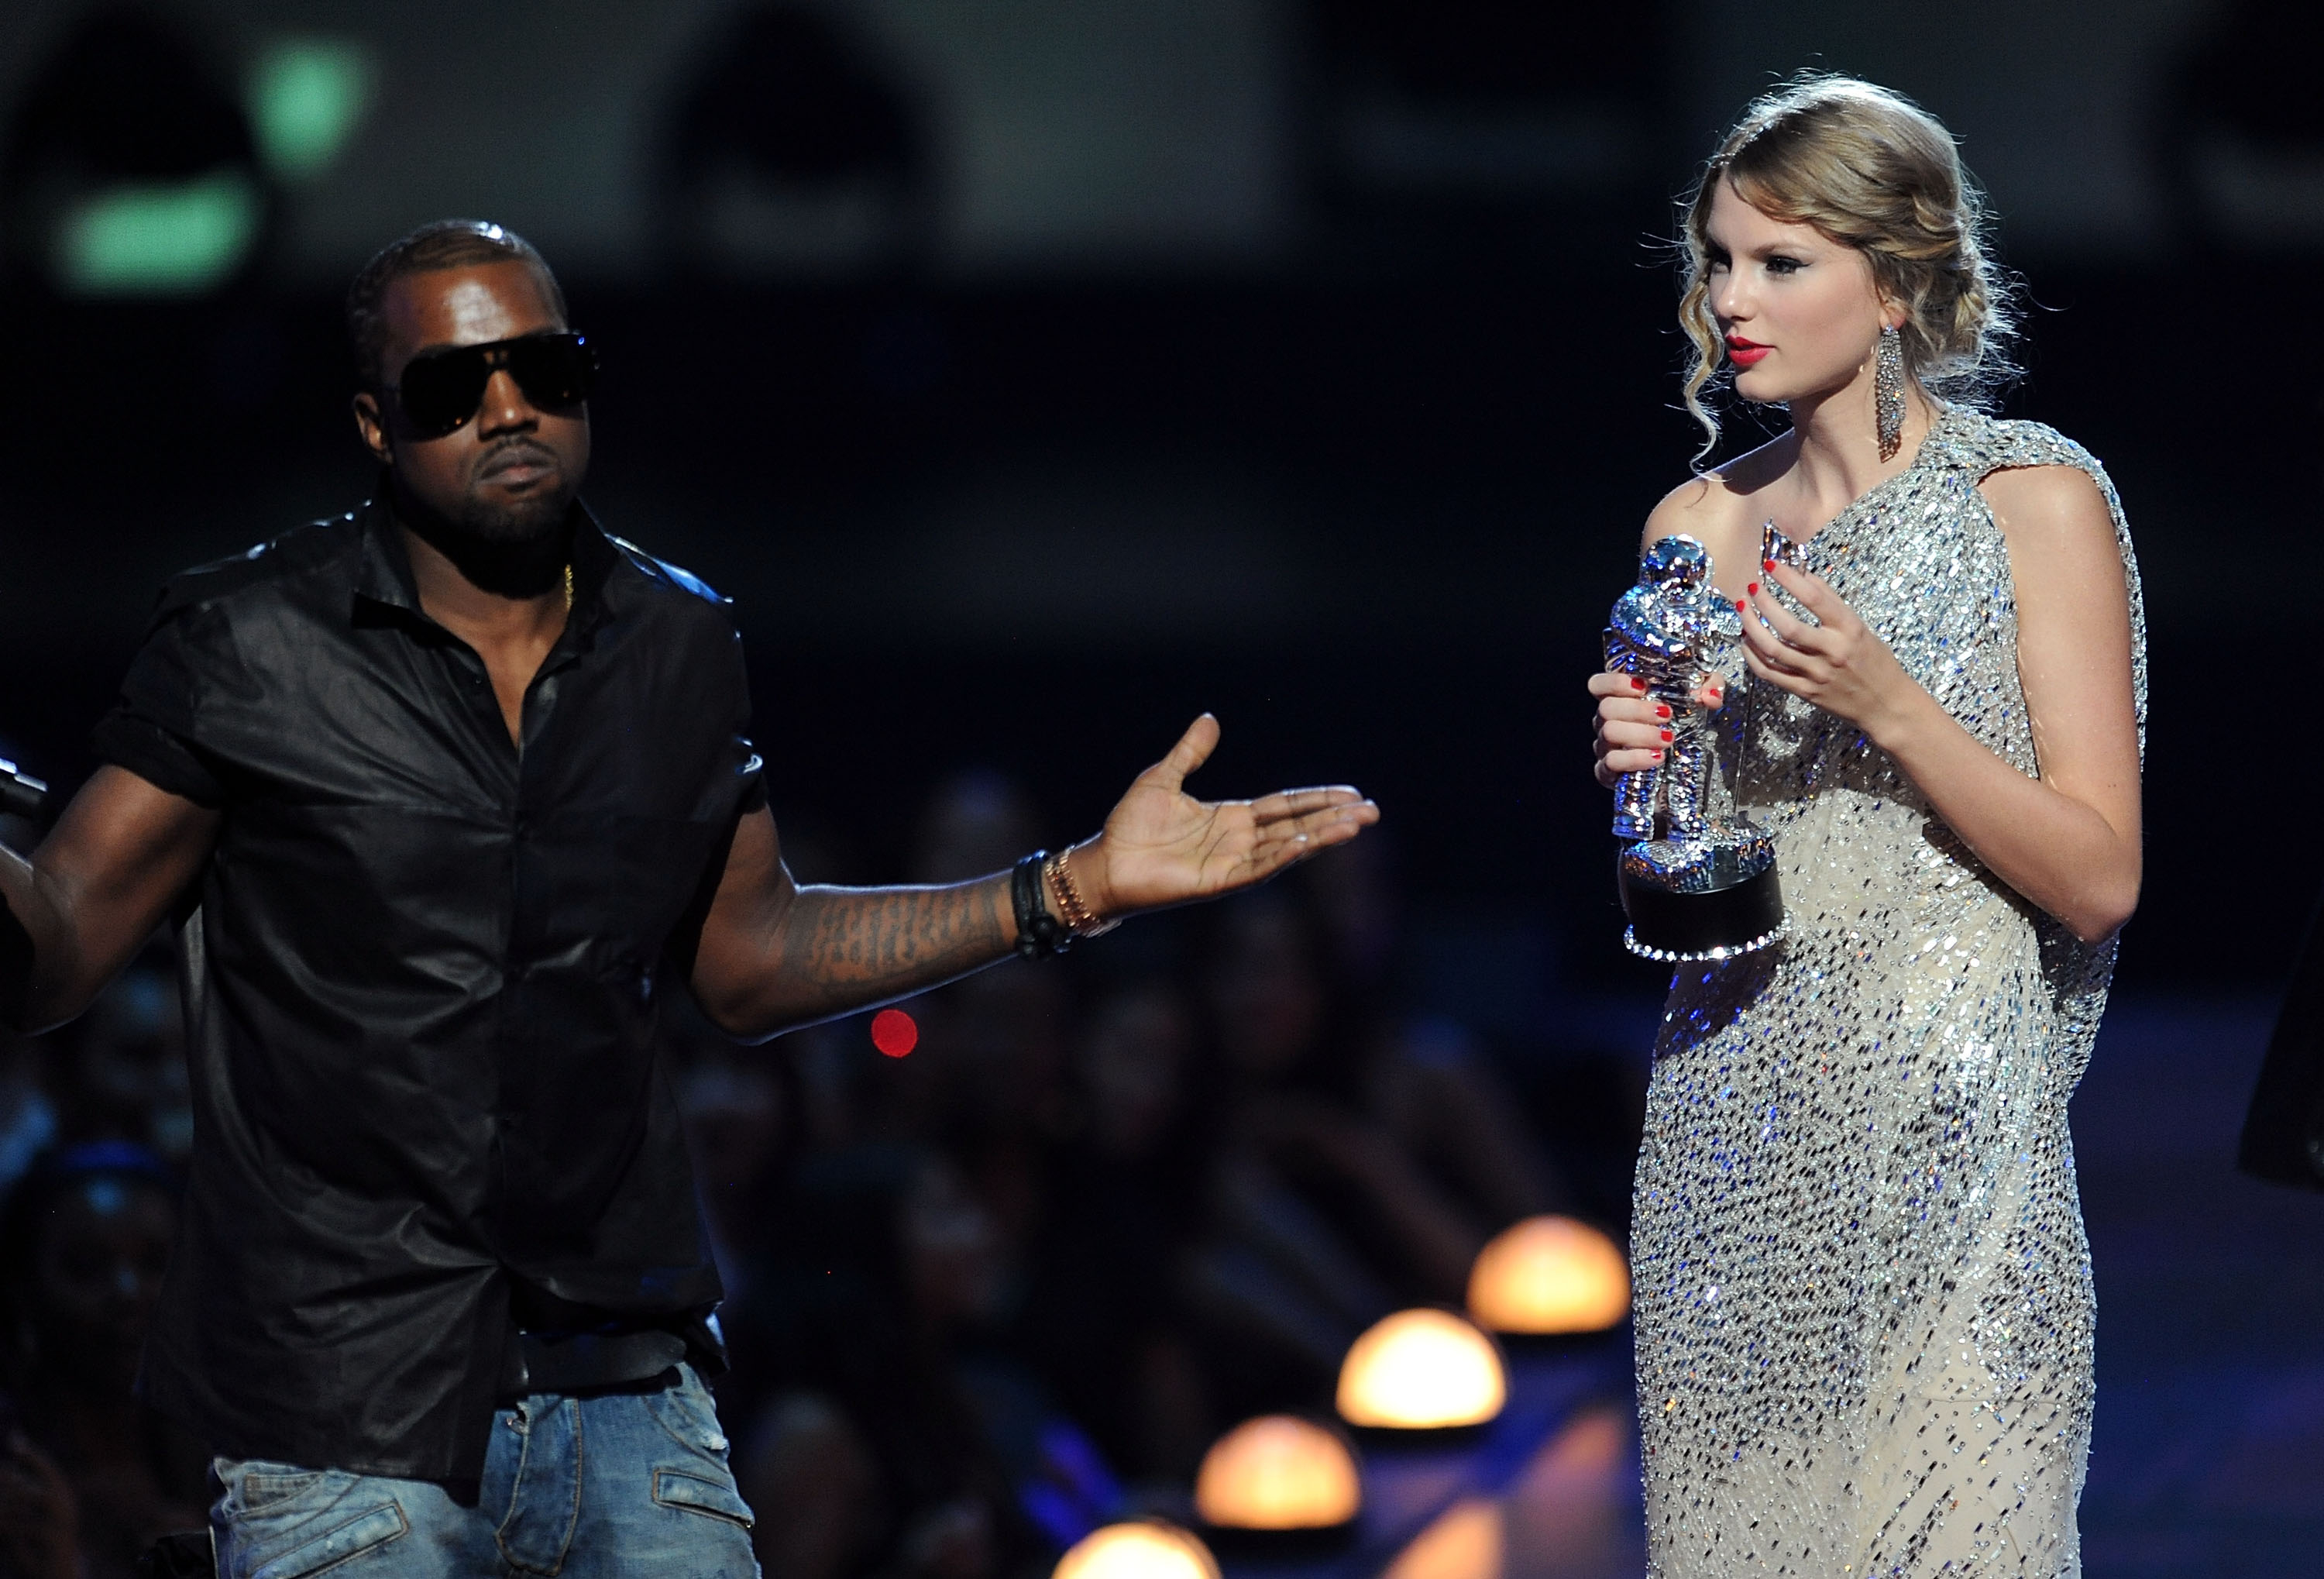 Kanye and Taylor onstage